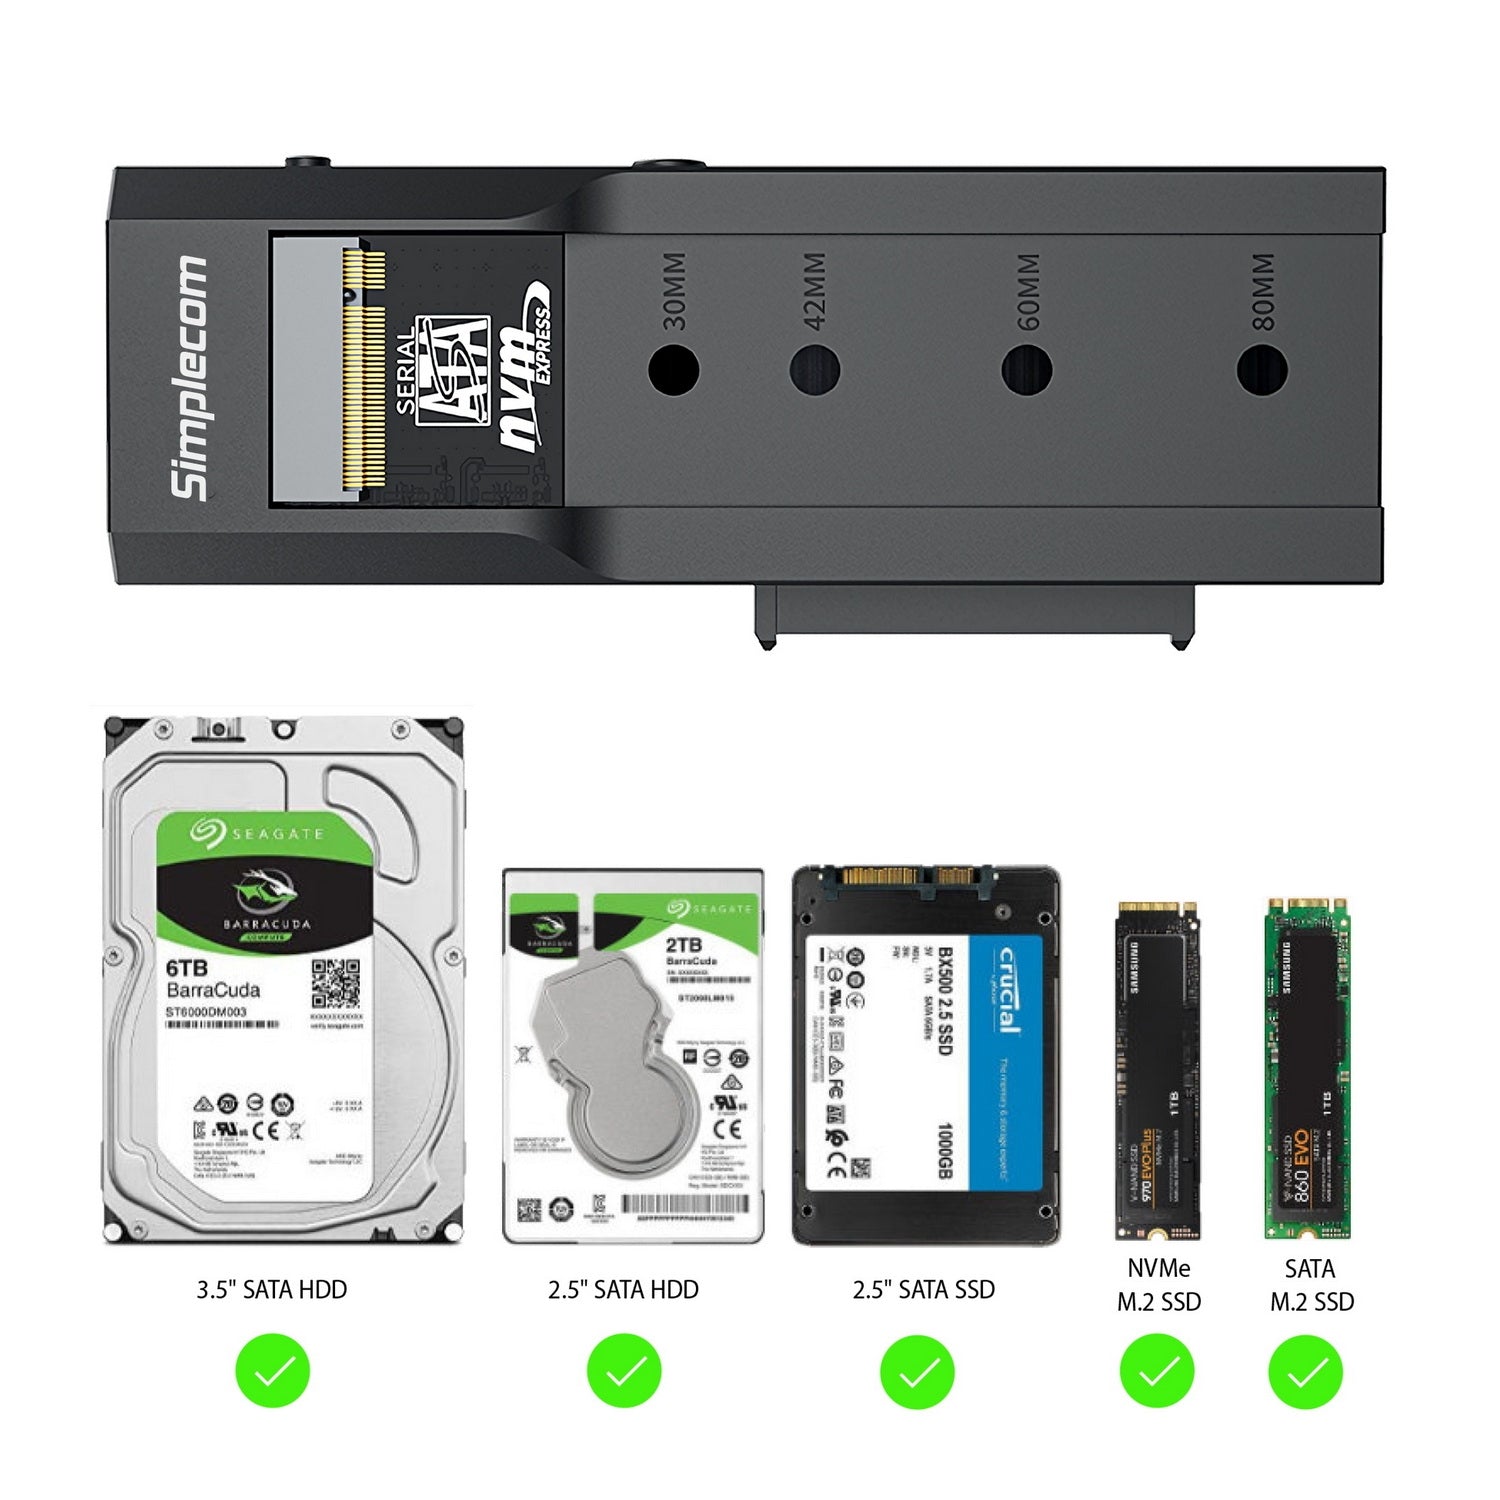 Usb To M.2 & Sata 2-In-1 Adapter: Hdd & Nvme/Sata M.2 Ssd, Usb 3.2 Gen2 10Gbps